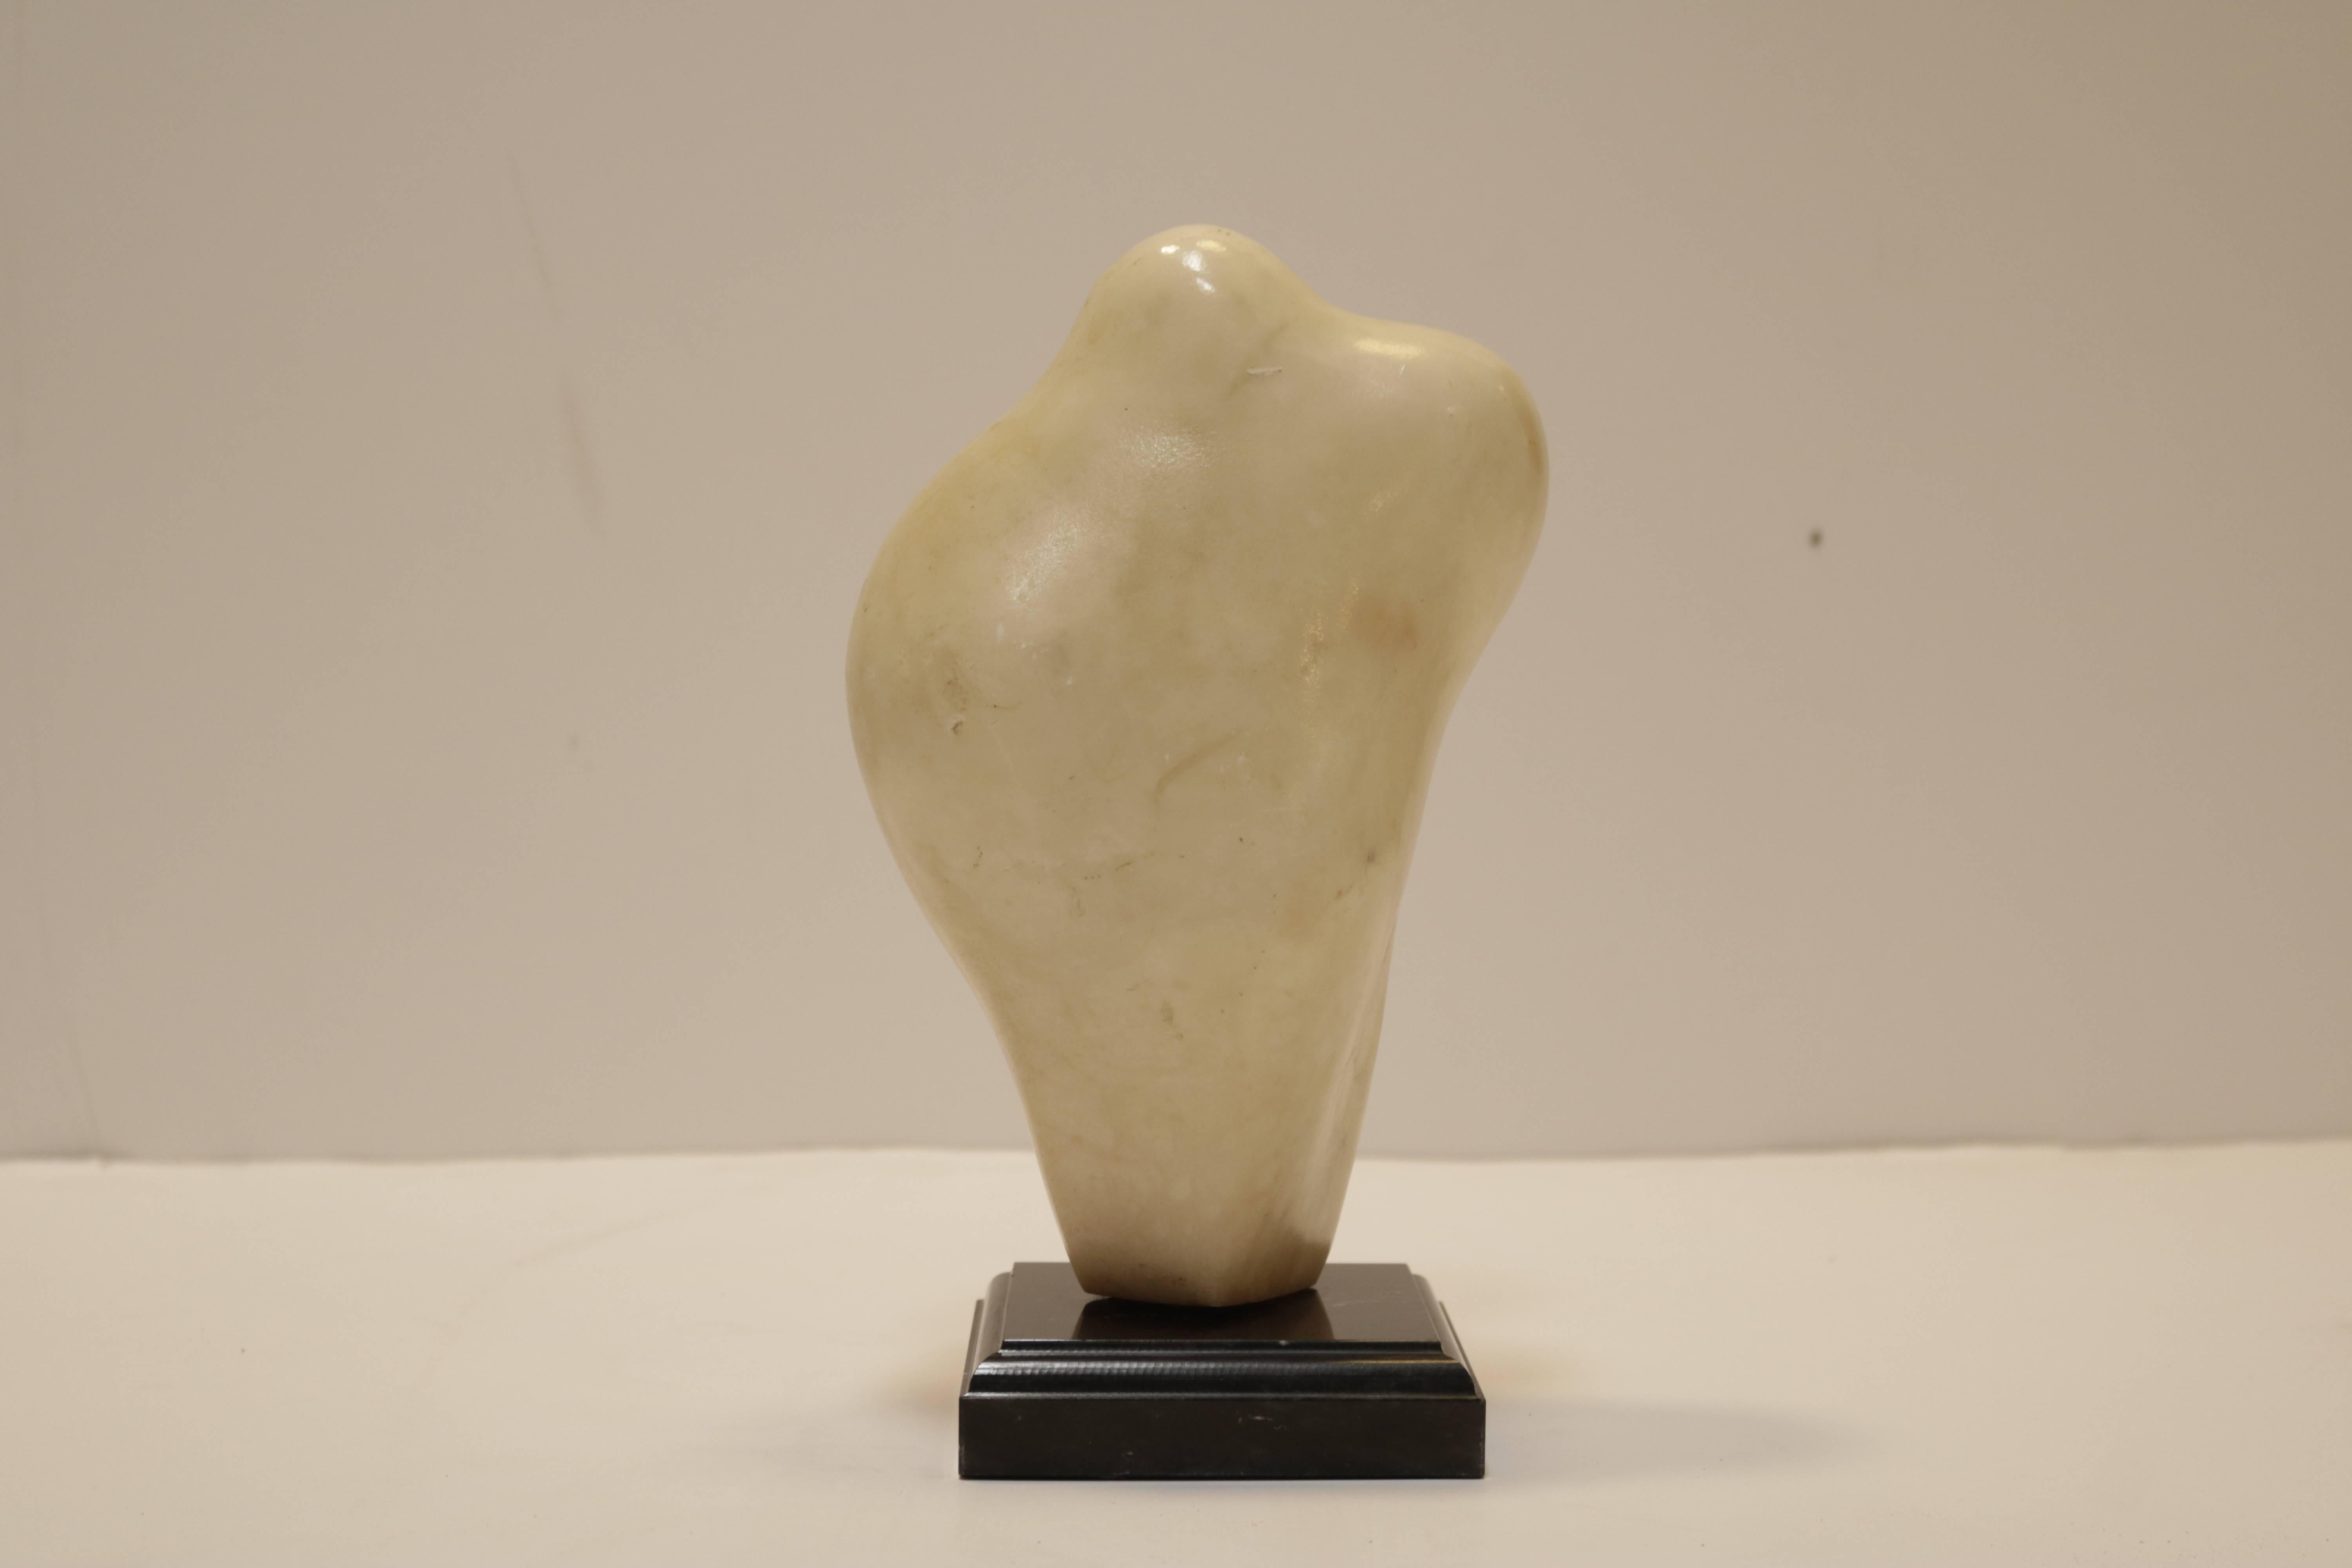 Small carved figurative white marble sculpture on a black marble base. Istvan Toth was a Hungarian artist who lived and worked in the Hollywood Hills from the 1960s through the 1990s.